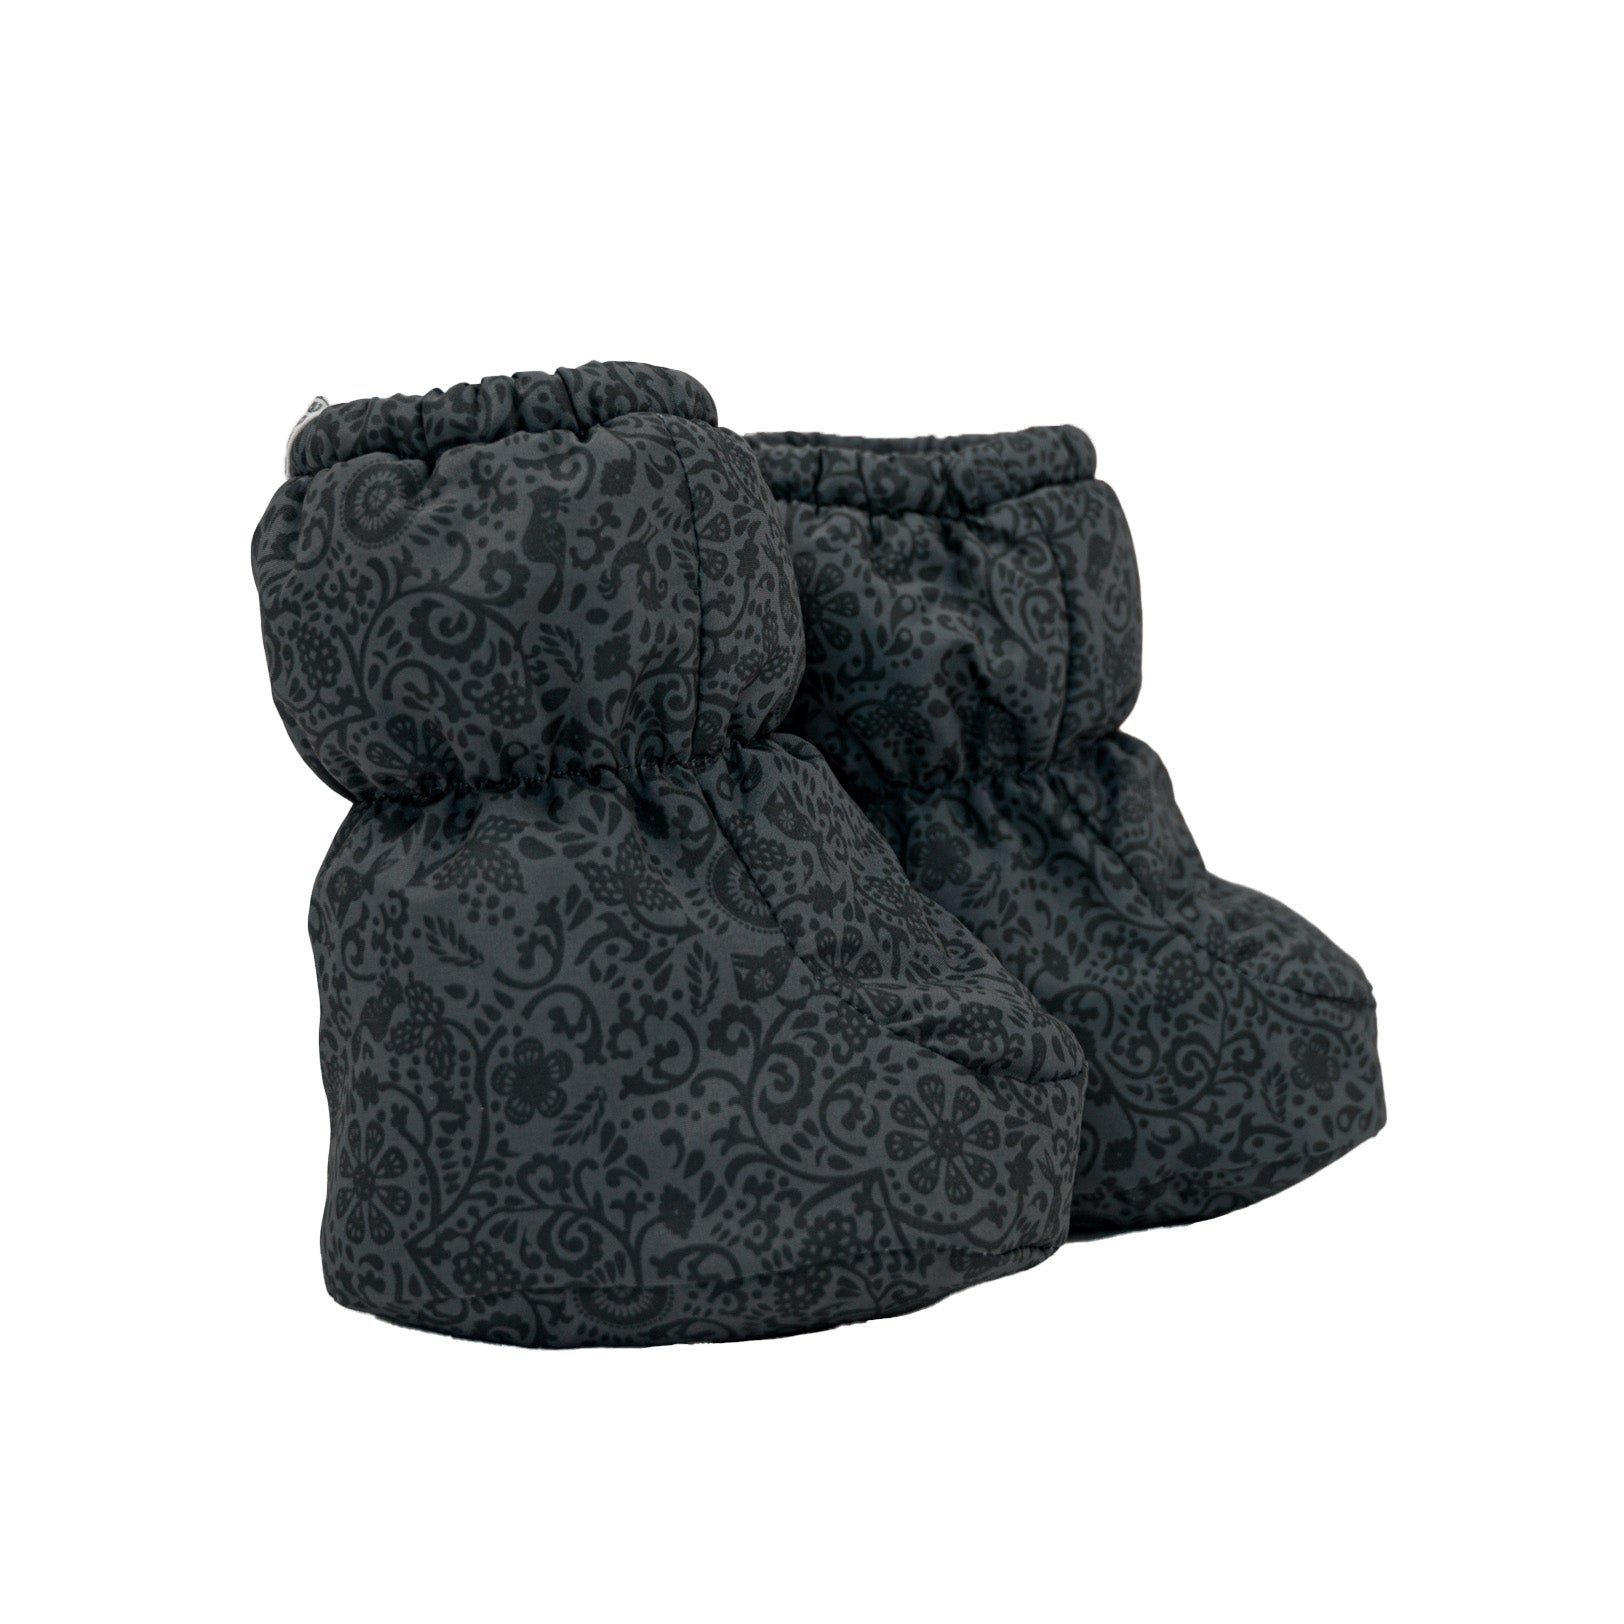 Lodger: Waterproof Winter Baby Boots shoes